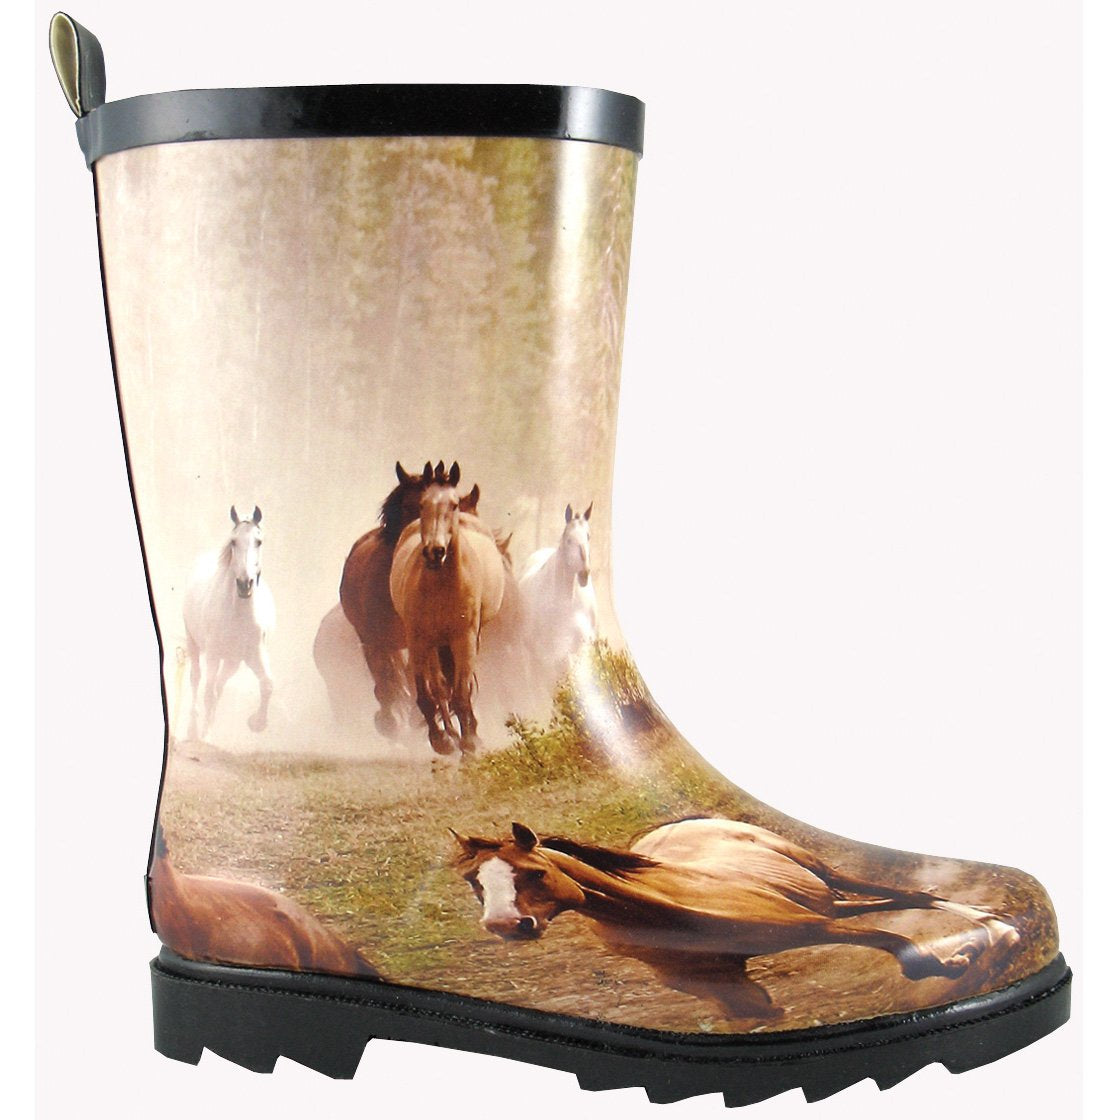 Smoky Mountain Children's Rubber Boot With Horse Print